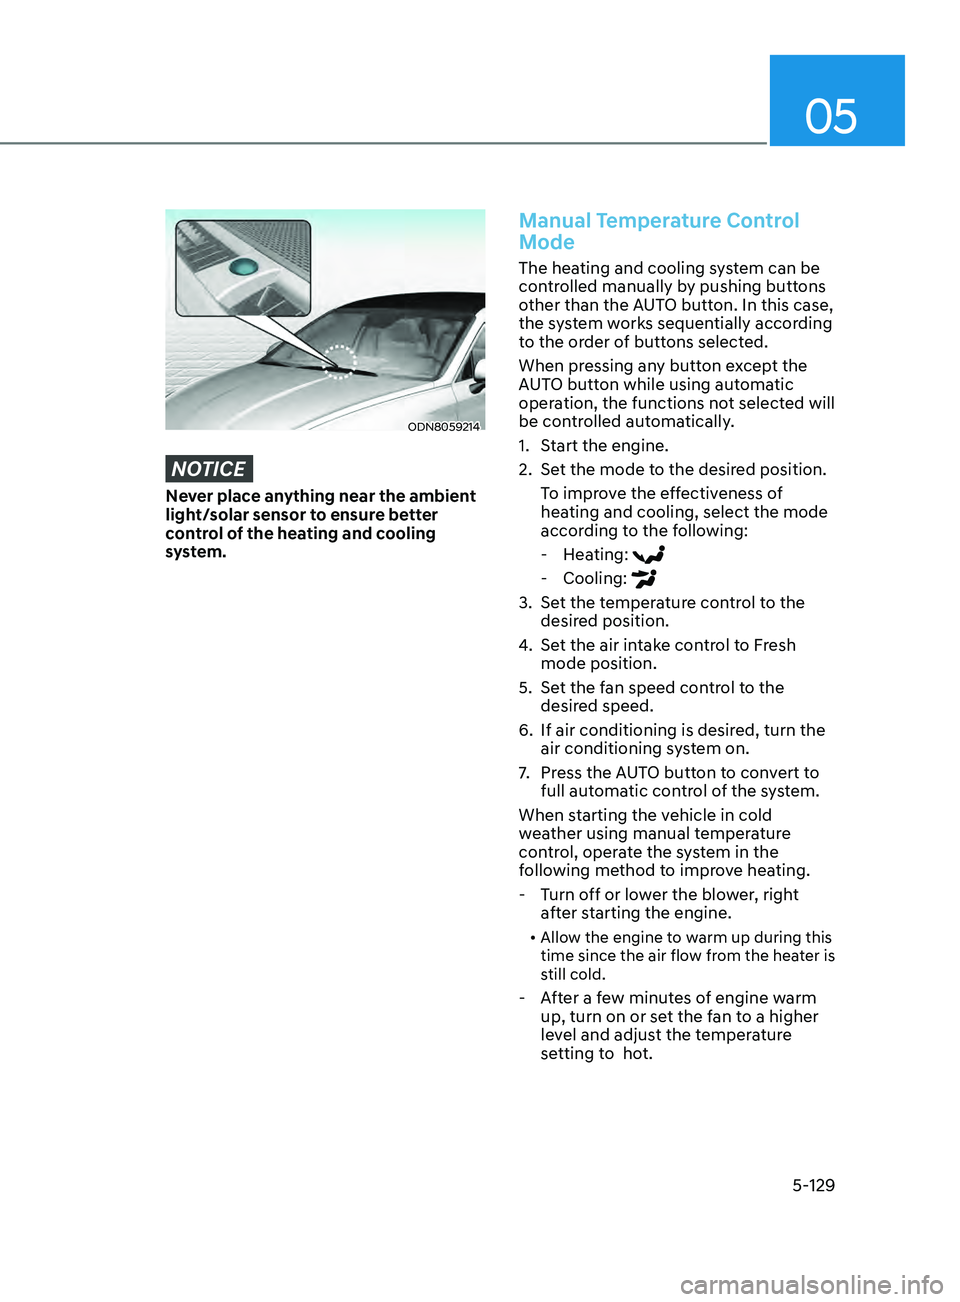 HYUNDAI SONATA 2021  Owners Manual 05
5-129
ODN8059214
NOTICE
Never place anything near the ambient 
light/solar sensor to ensure better 
control of the heating and cooling 
system.
Manual Temperature Control 
Mode
The heating and cool